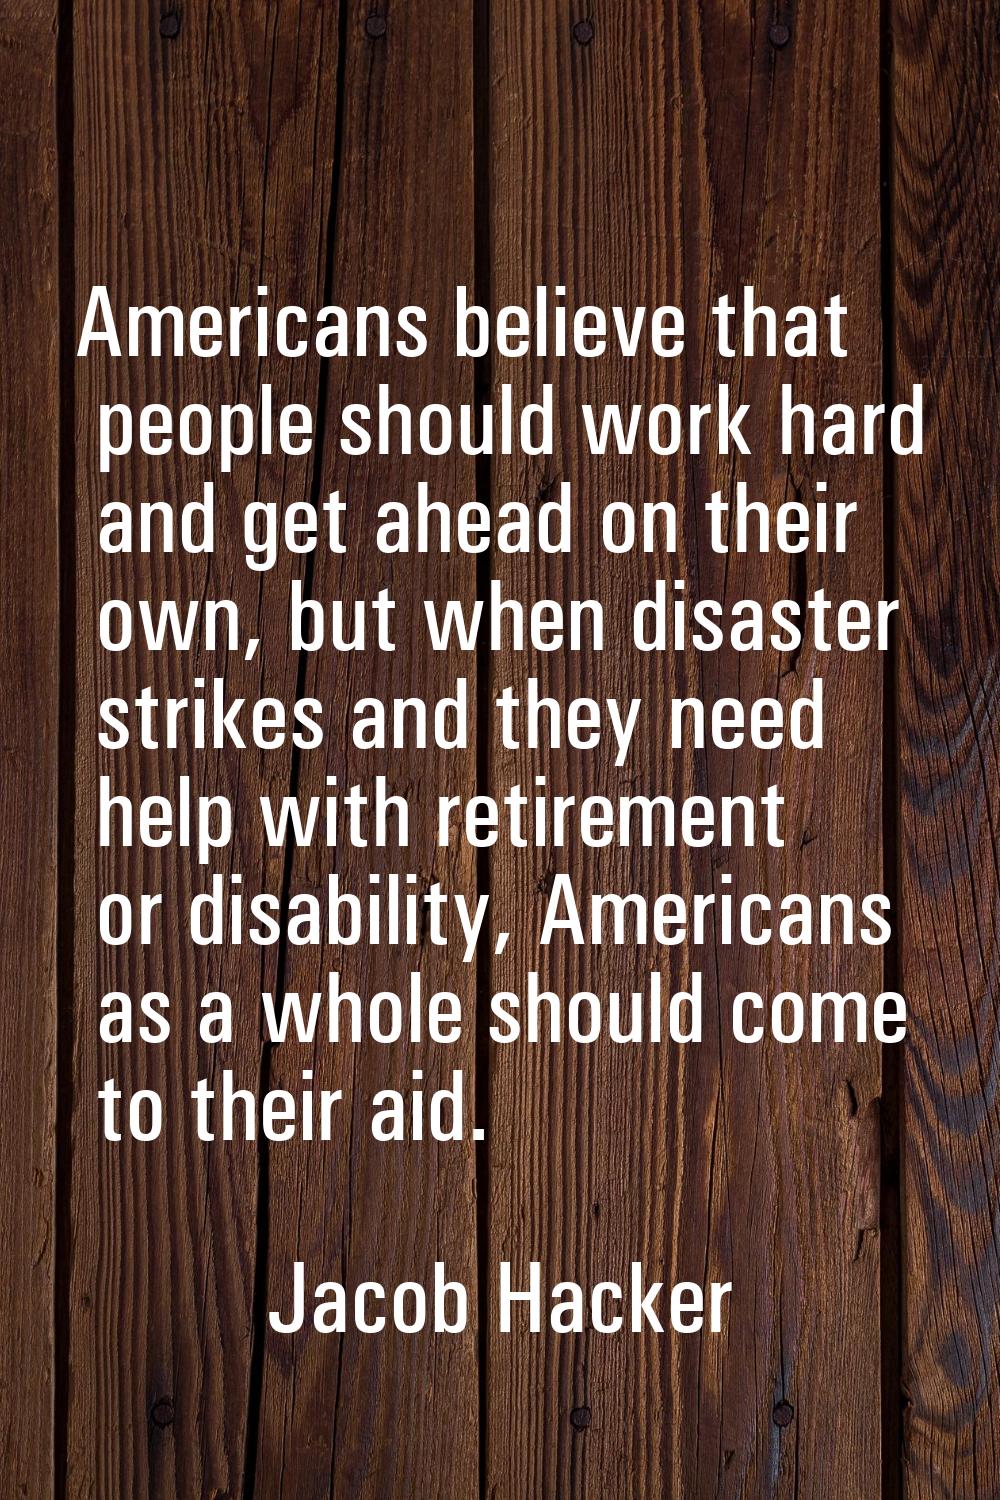 Americans believe that people should work hard and get ahead on their own, but when disaster strike